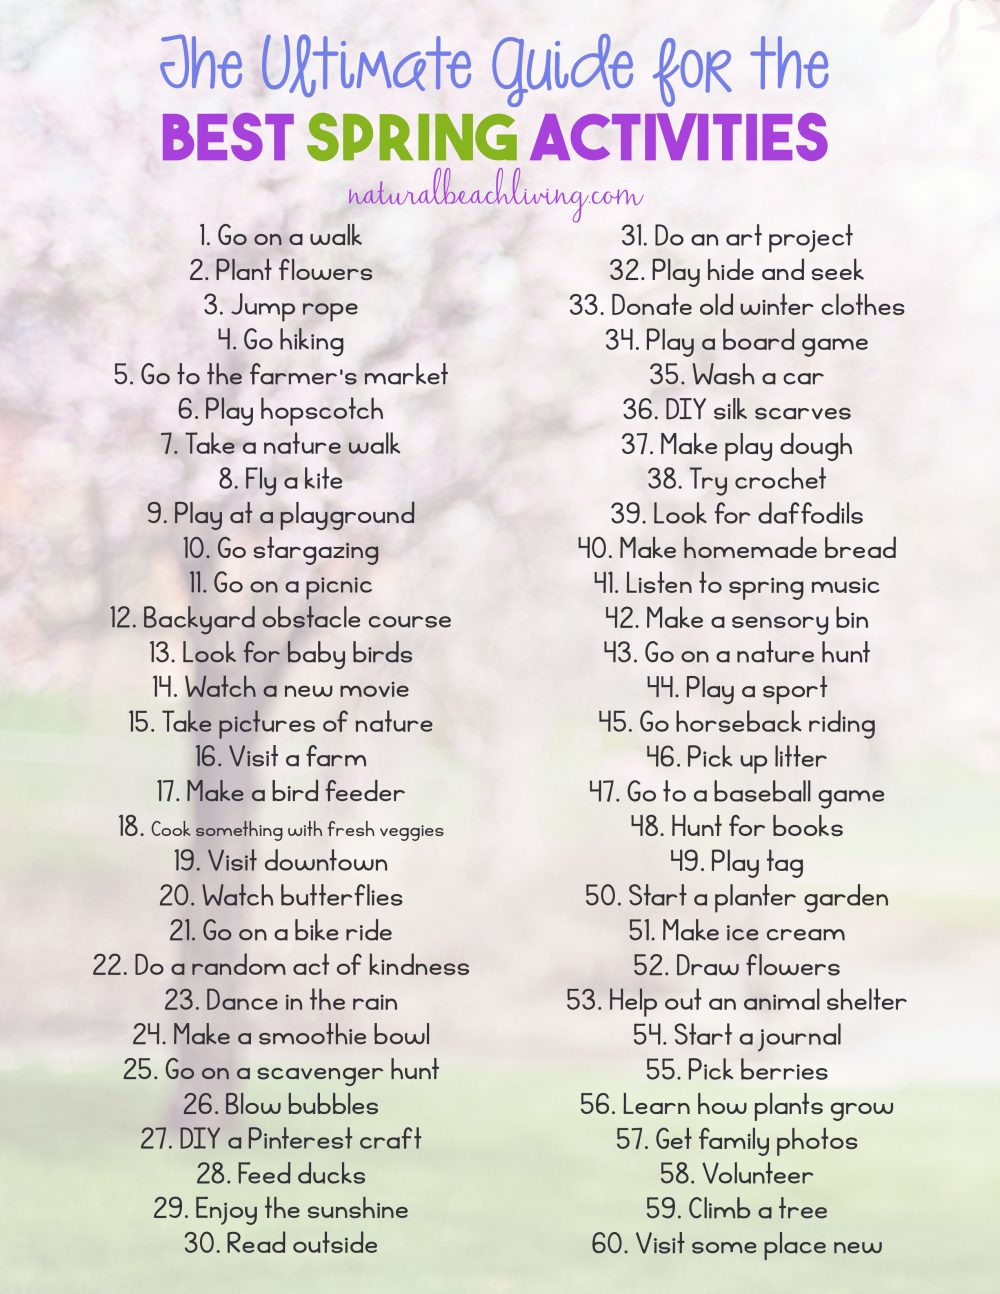 The Ultimate Guide to the Best Spring Activities – Spring Bucket List Ideas Free Printable